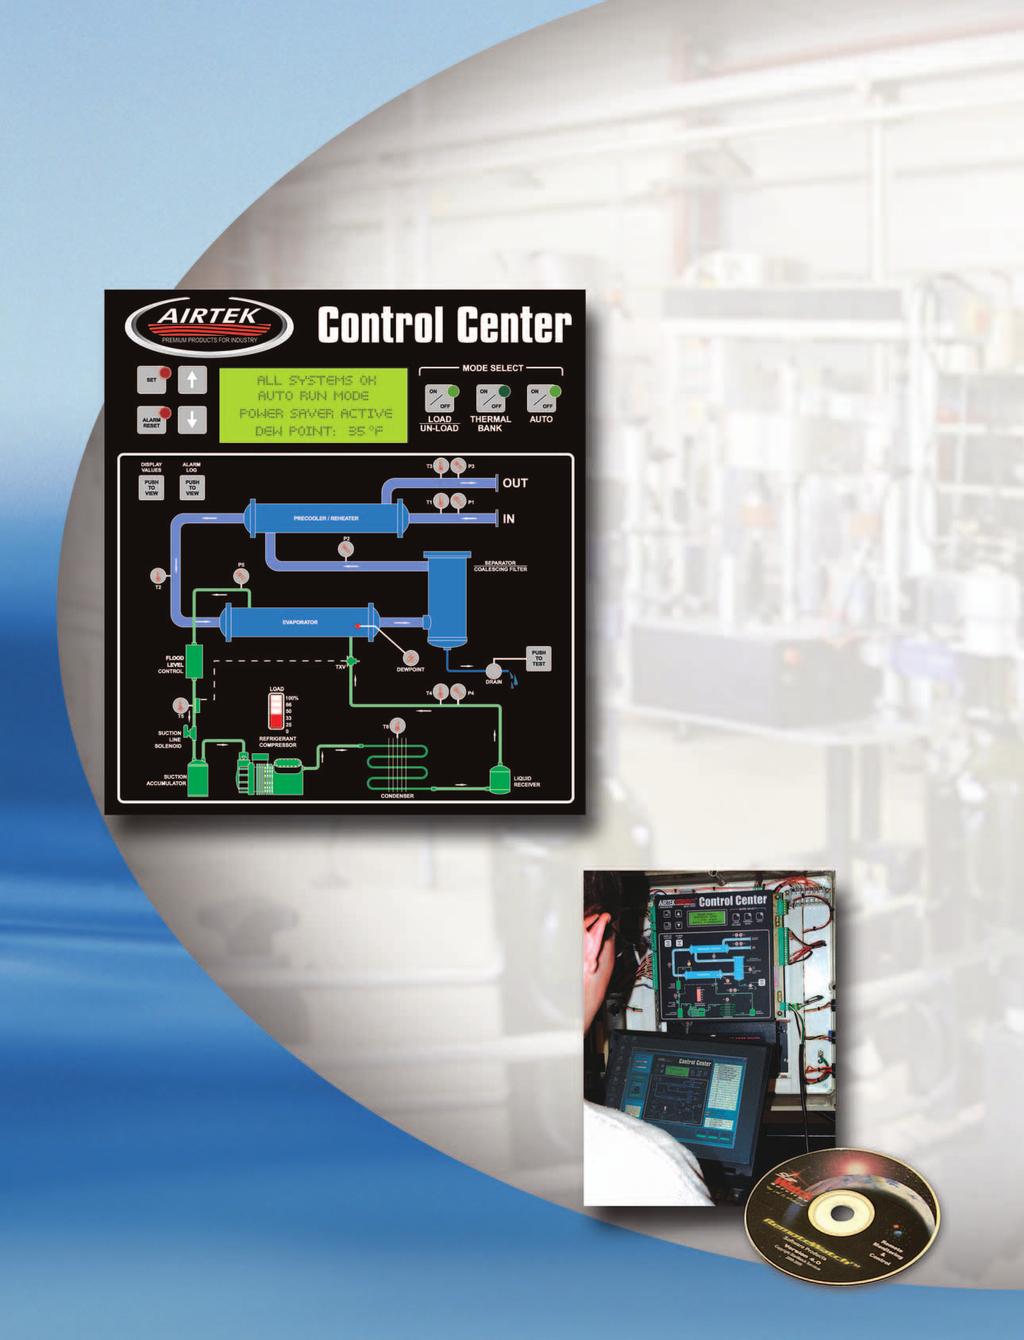 Airtek s optional Control Center (C/ 400 to C/ 3000) features a complete complement of data acquisition functions.